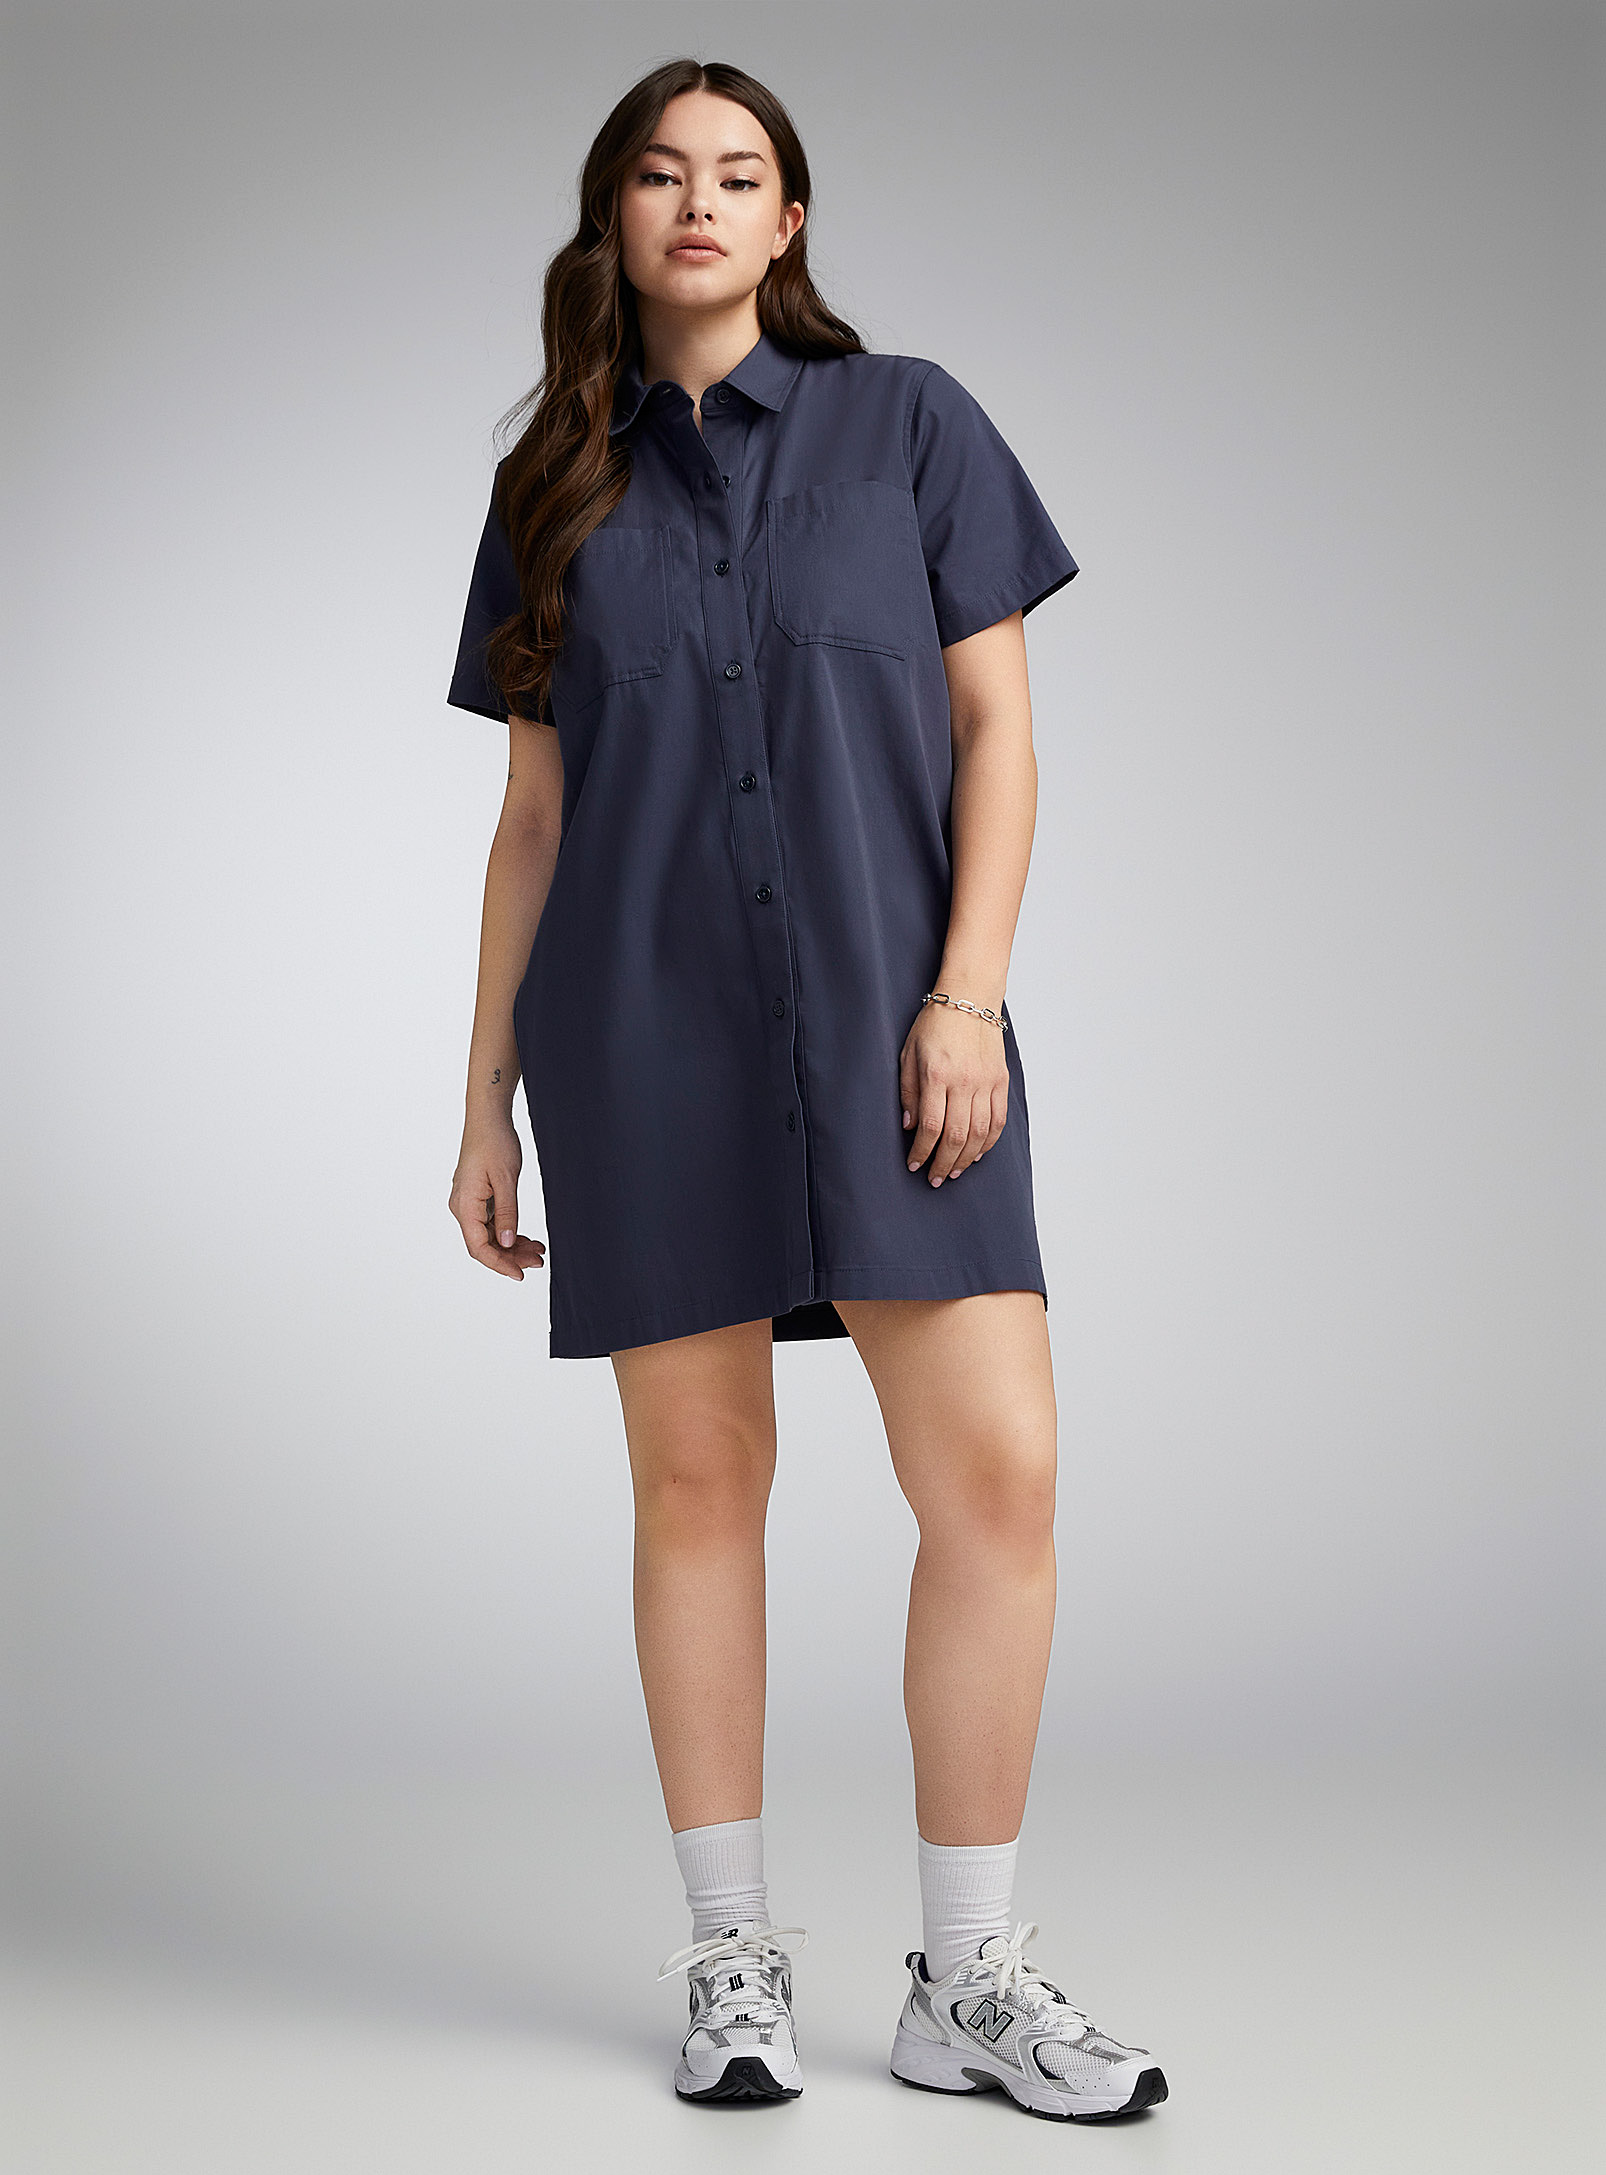 Twik Patch Pockets Colourful Shirtdress In Marine Blue